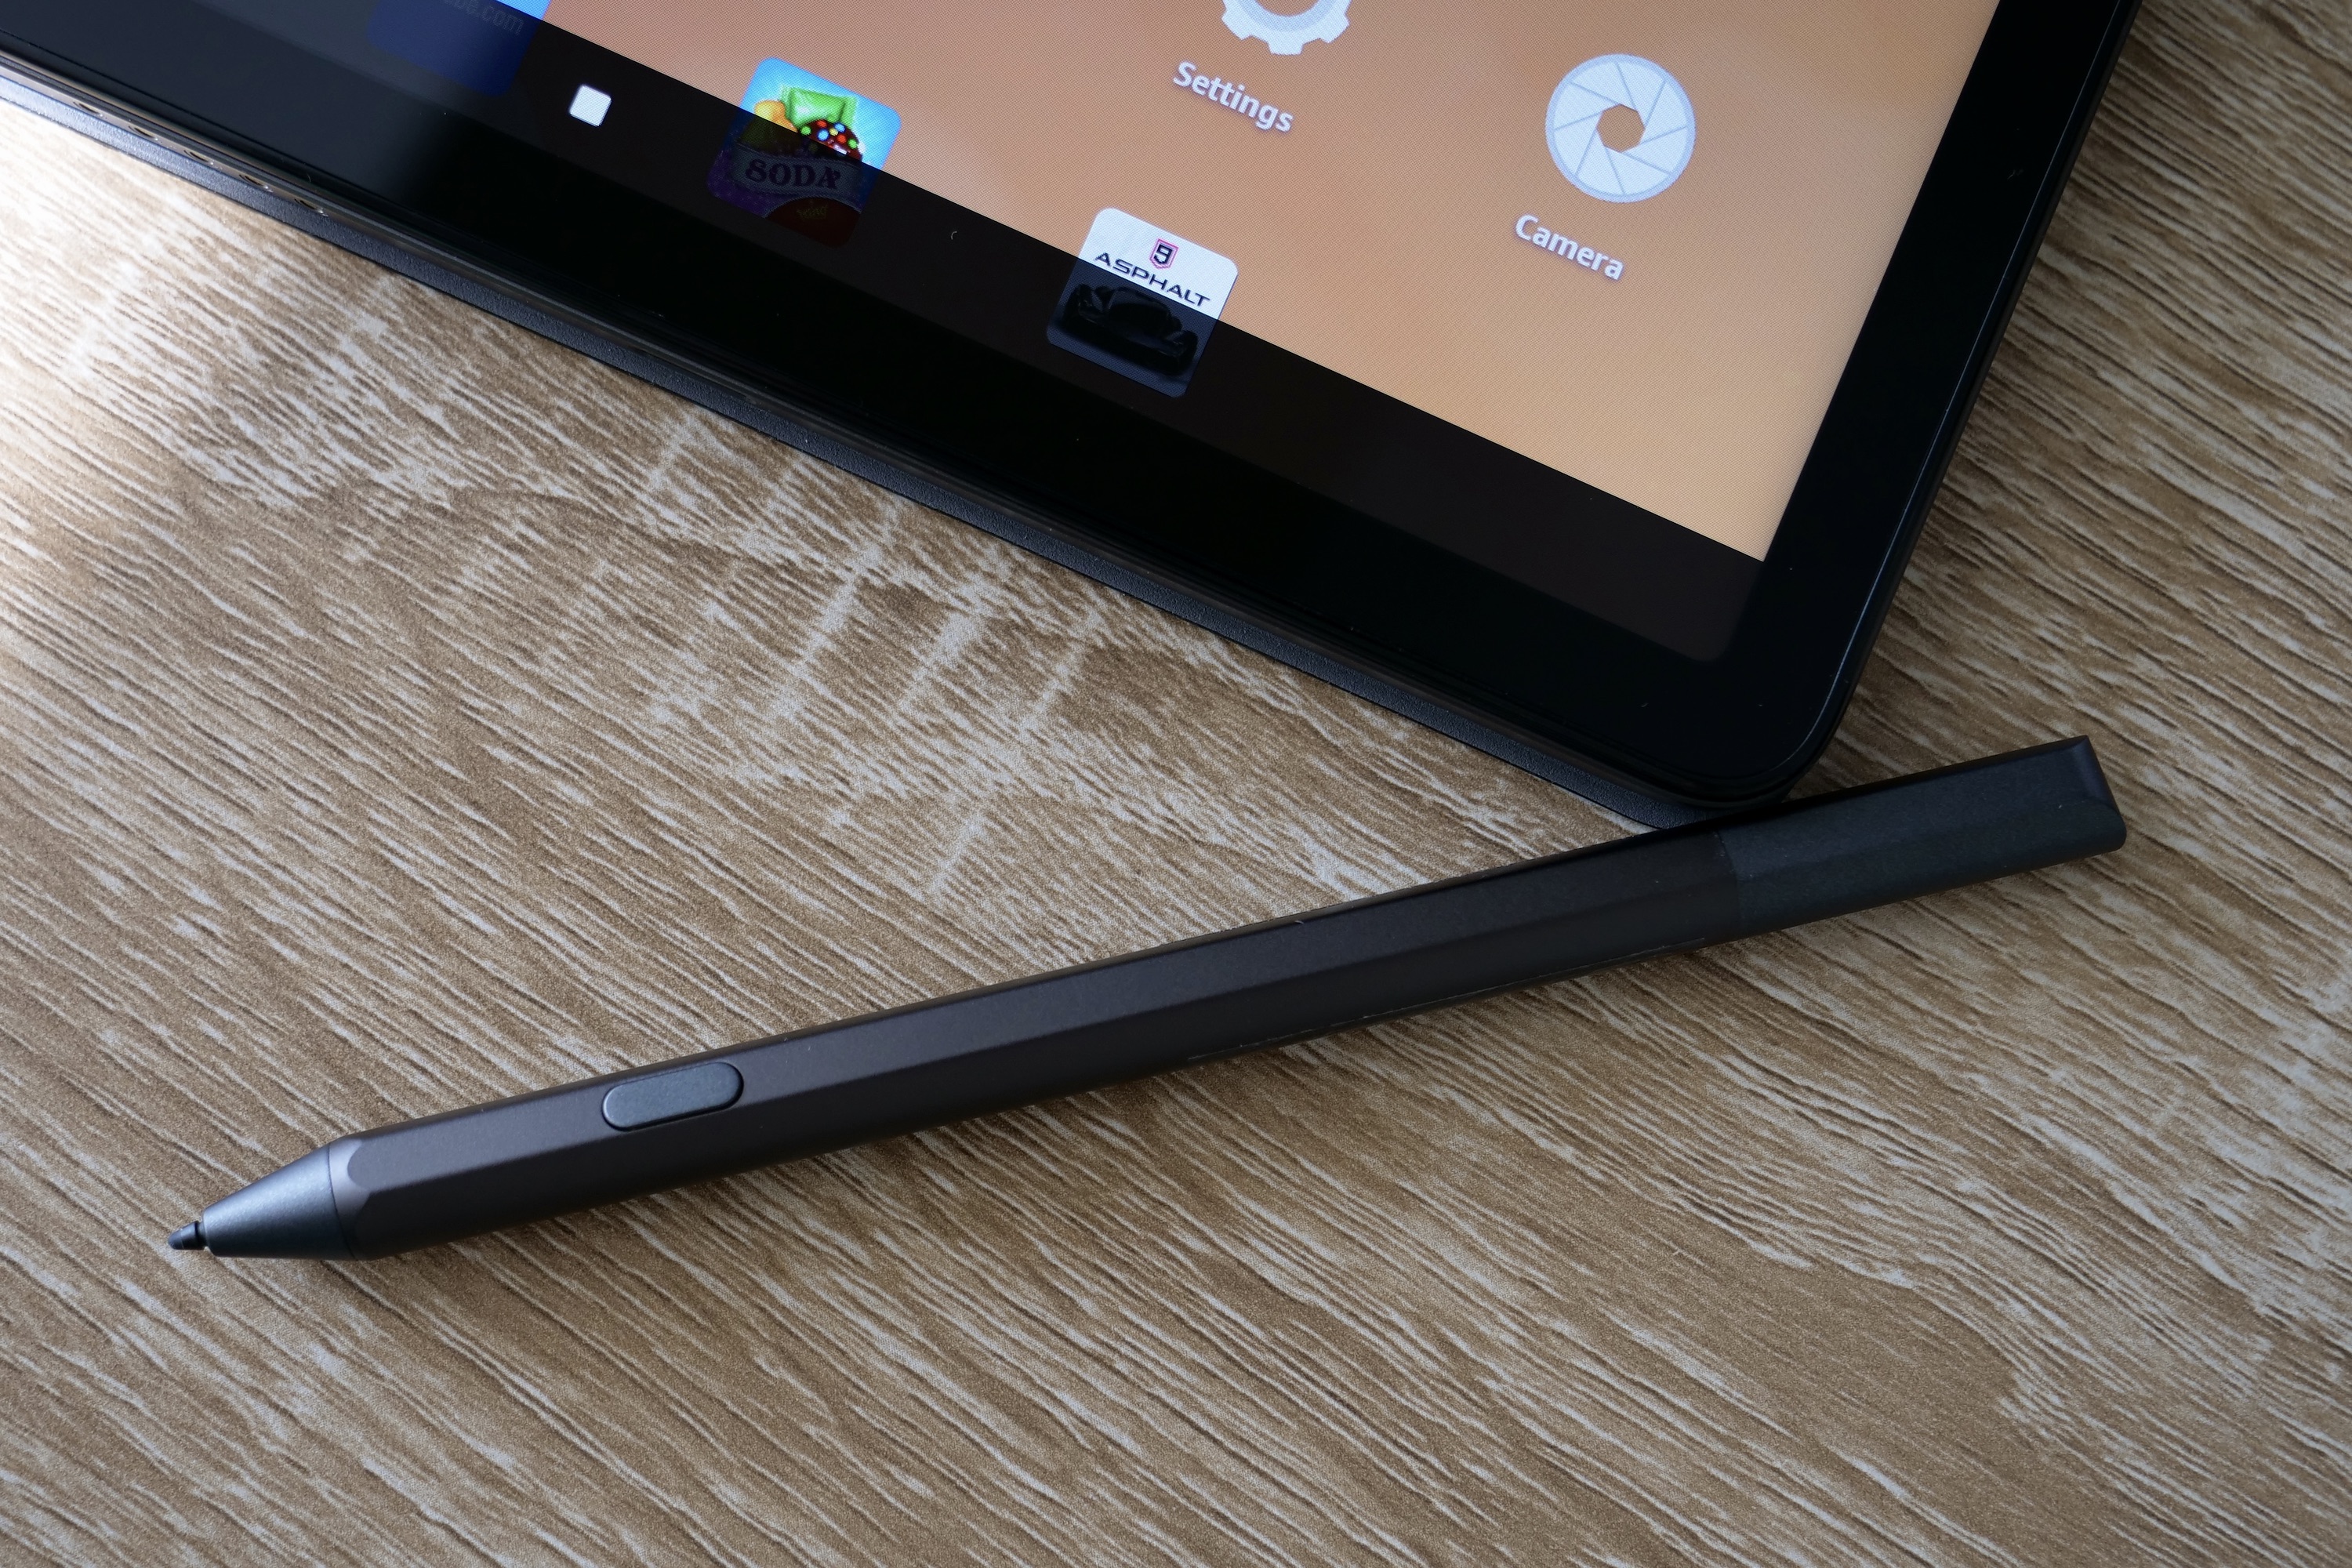 Fire Max 11 review: an Android tablet you should buy